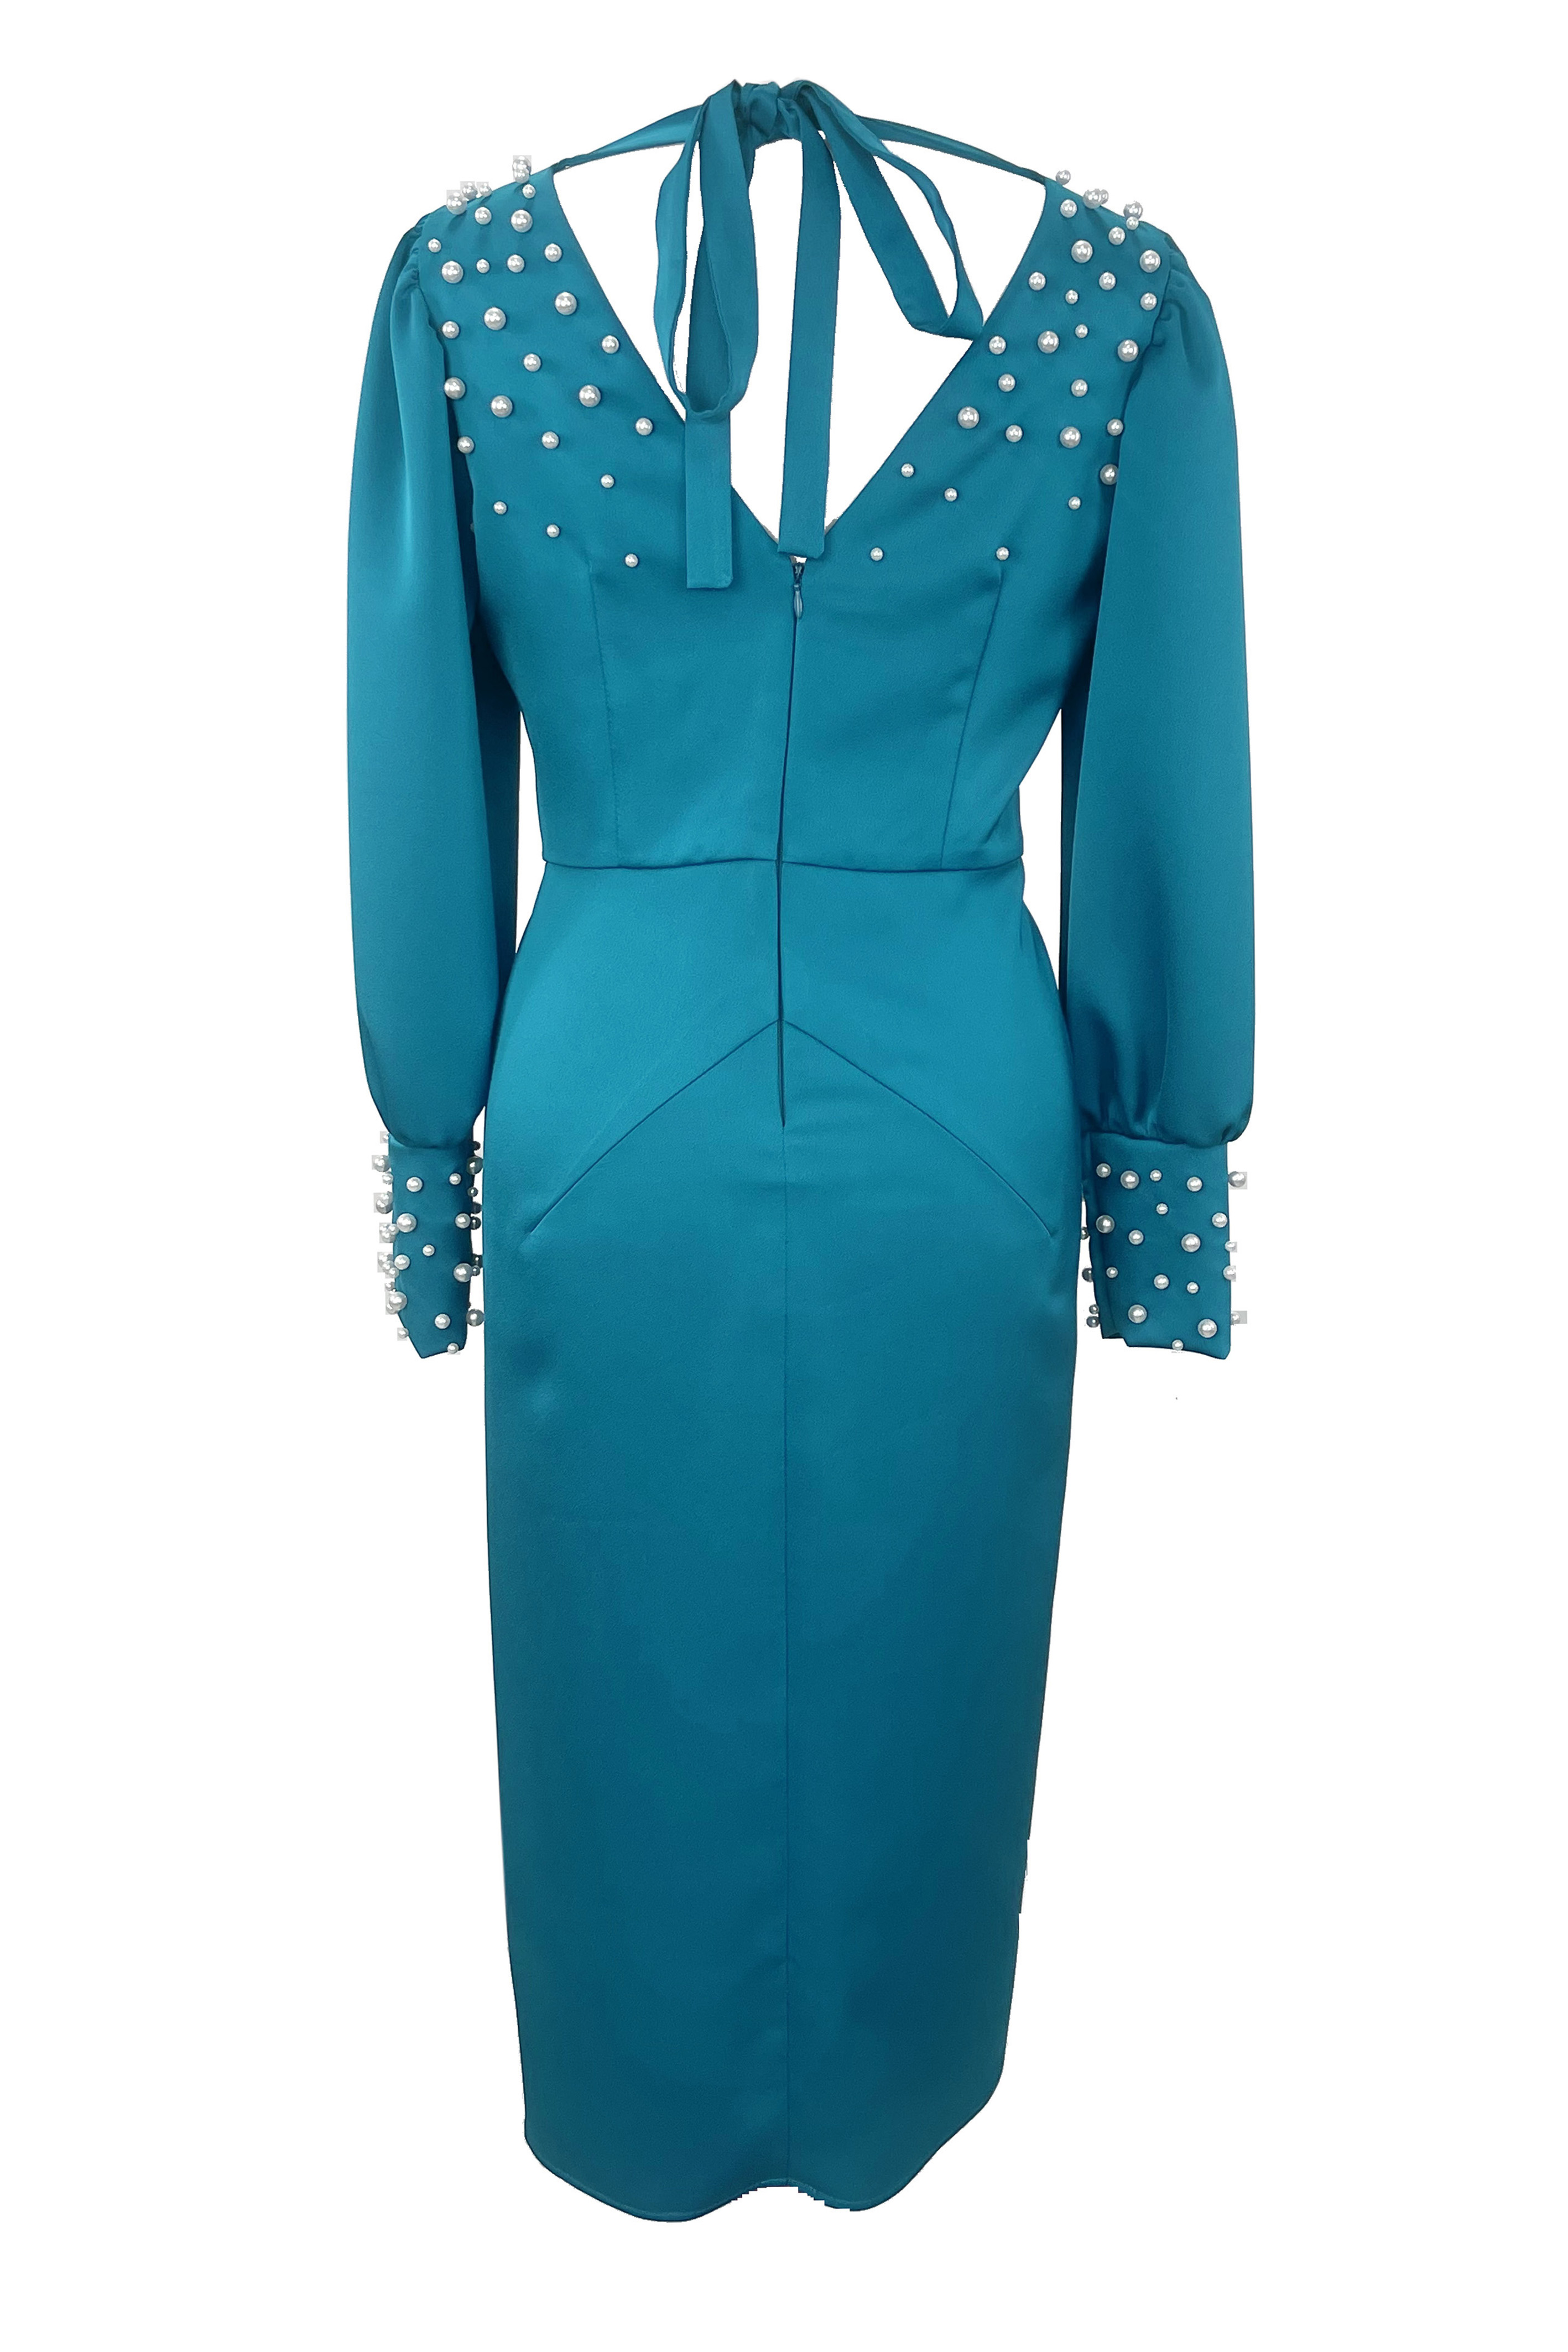 R24101 - TURQUOISE 01 - AMINA turquoise dress with pearls - Ambar Studio copy